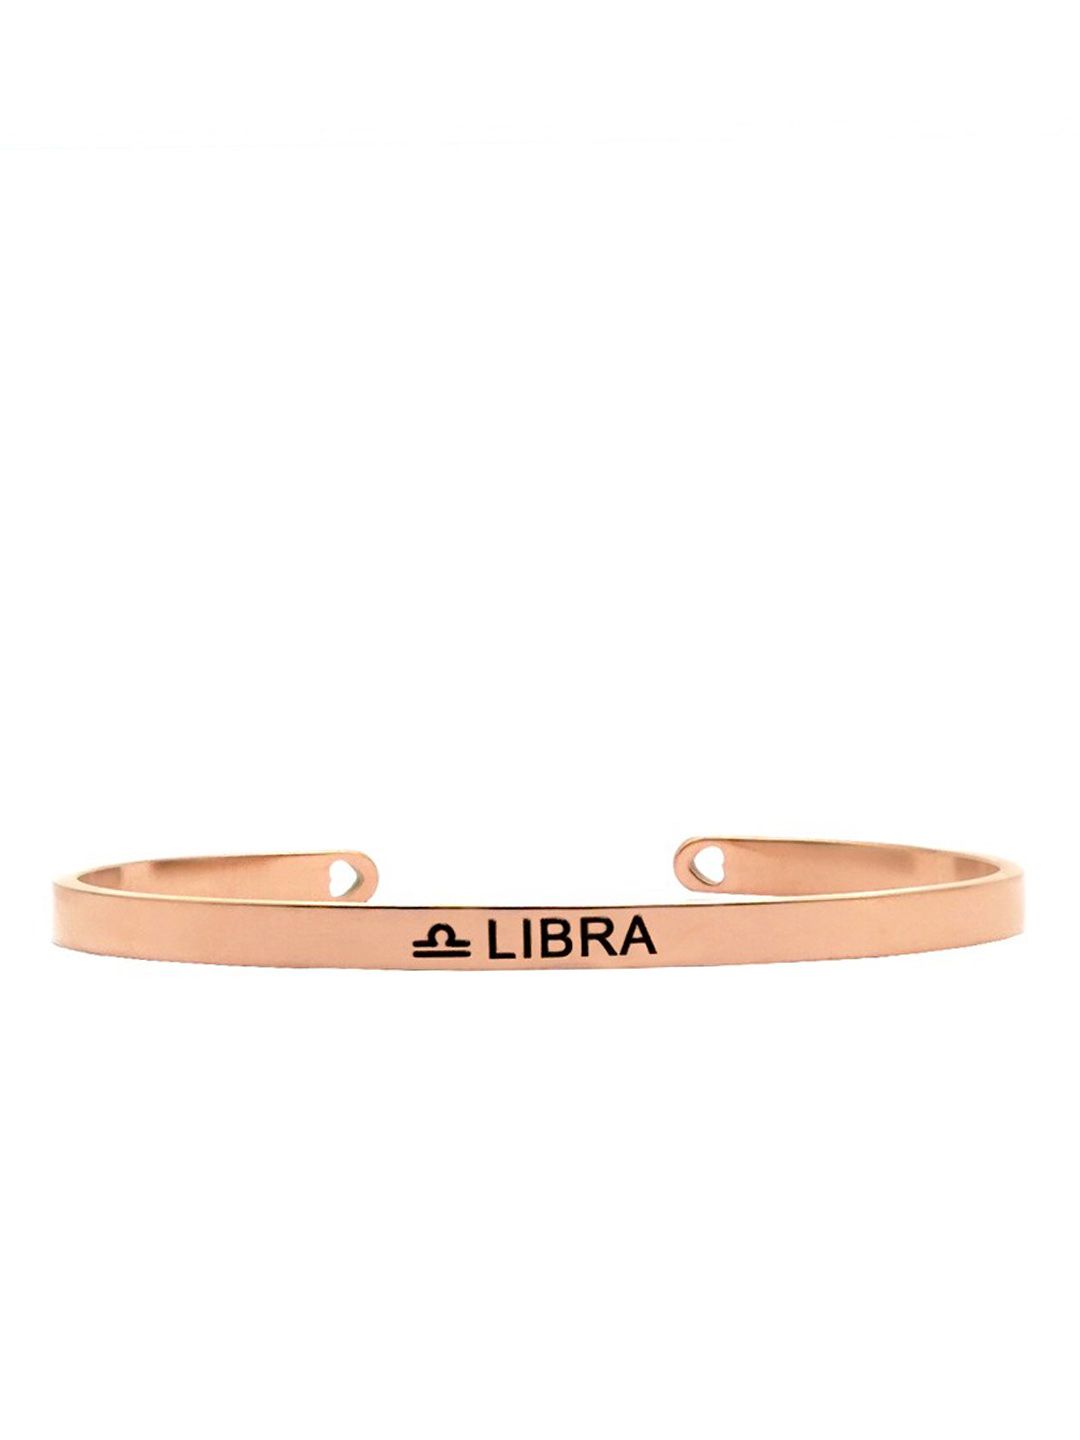 JOKER & WITCH Rose Gold-Plated Stainless Steel Libra Zodiac Cuff Bracelet Price in India